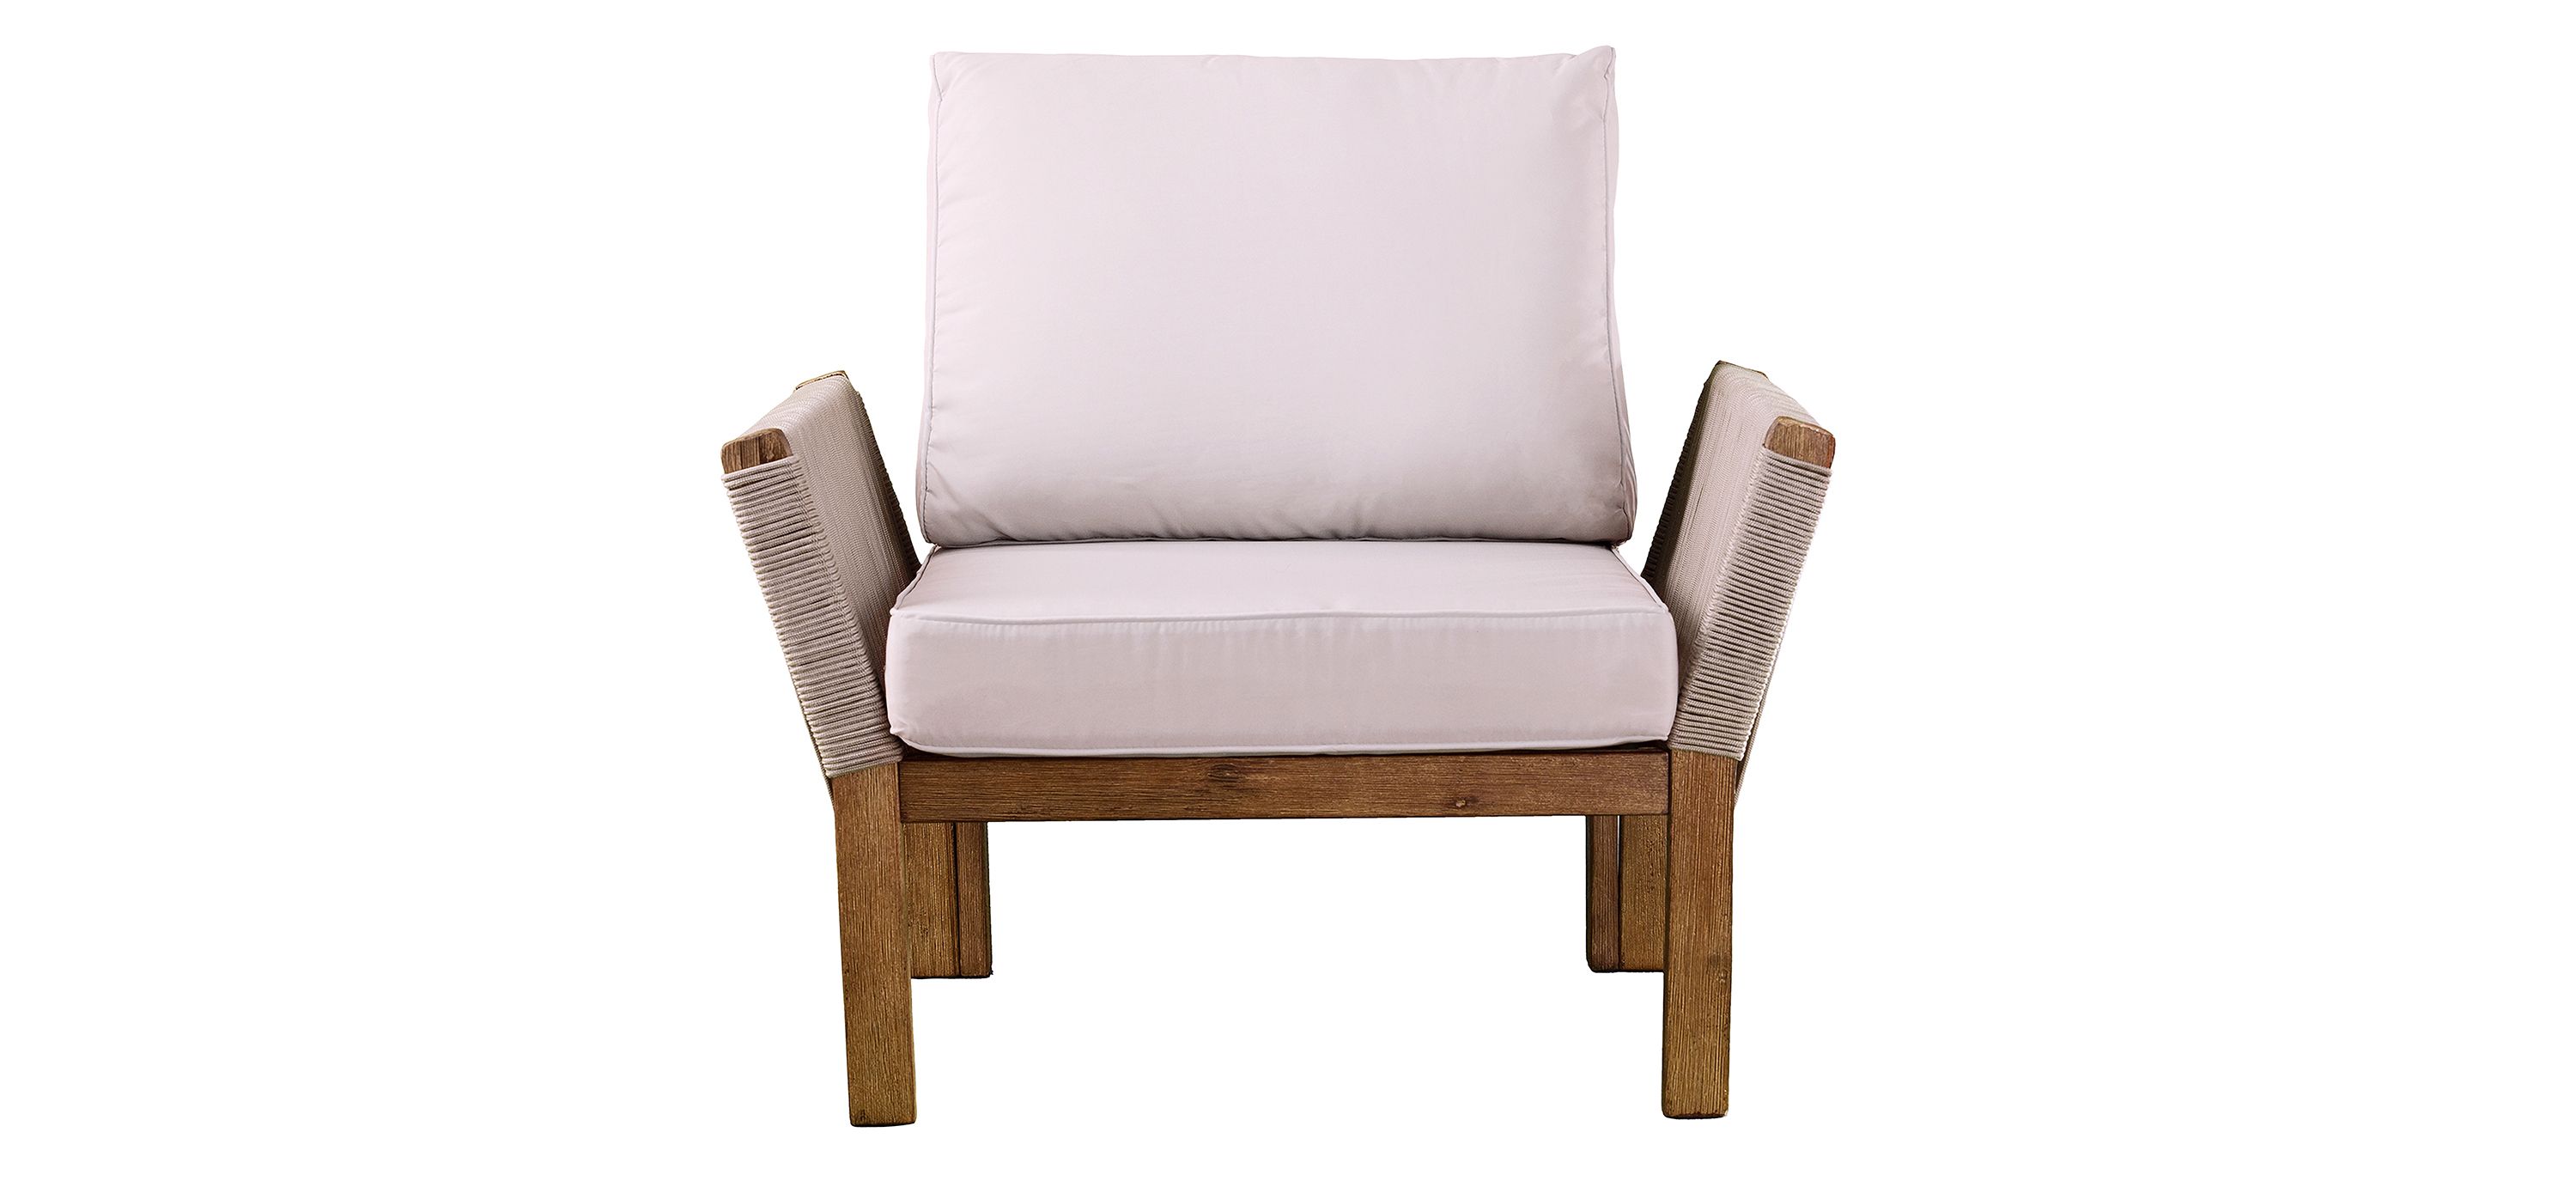 Savoy Outdoor Arm Chair